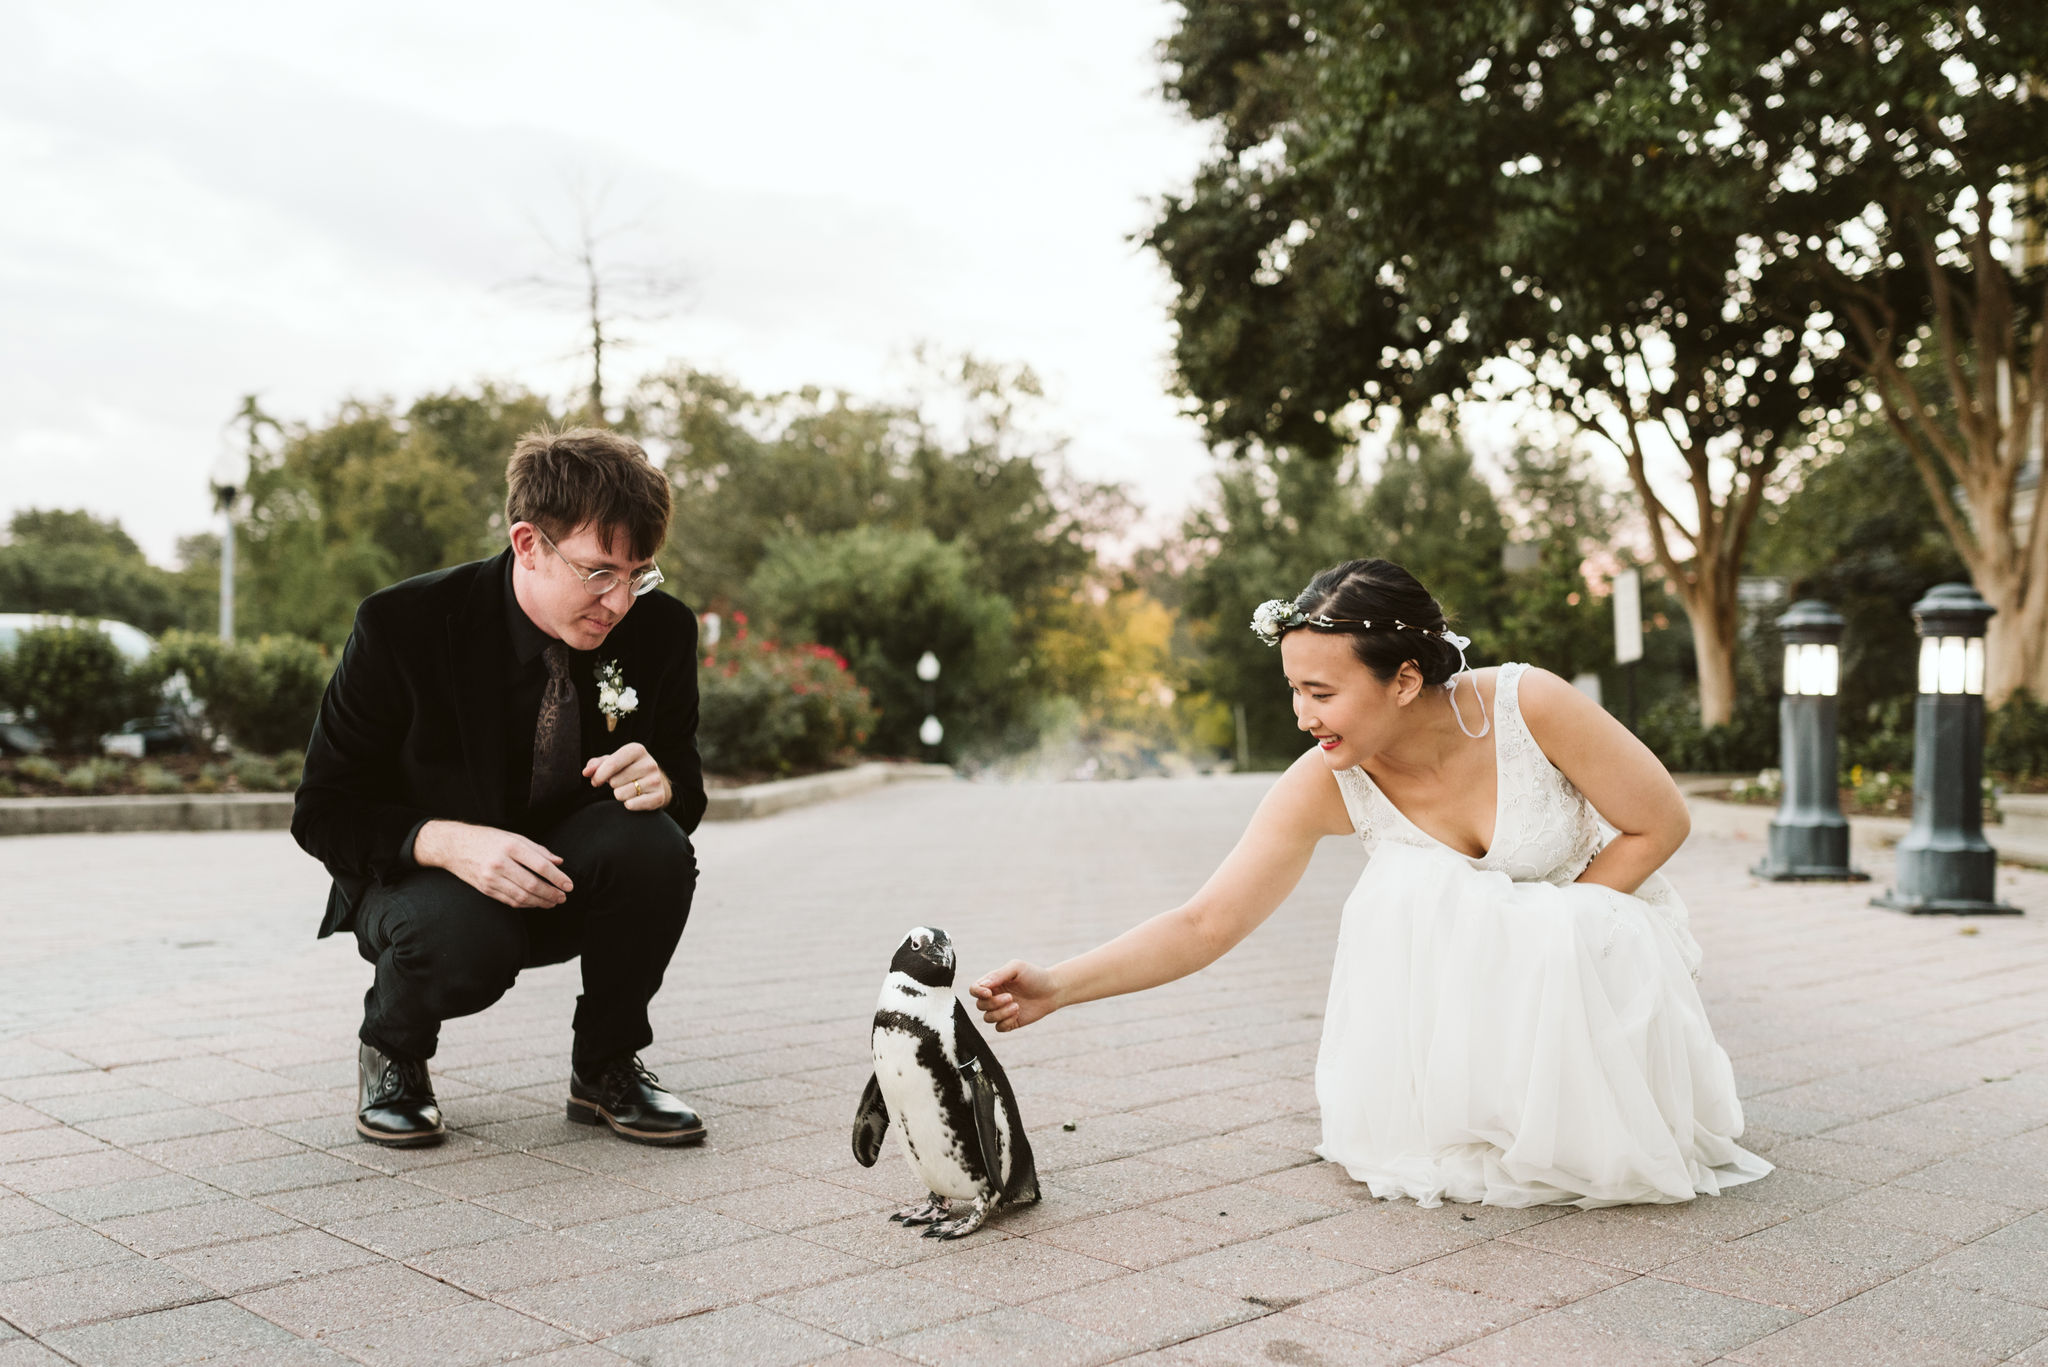  Baltimore, Maryland Wedding Photographer, The Mansion House at the Maryland Zoo, Relaxed, Romantic, Laid Back, Bride and Groom Petting a Penguin After Ceremony, Animals 